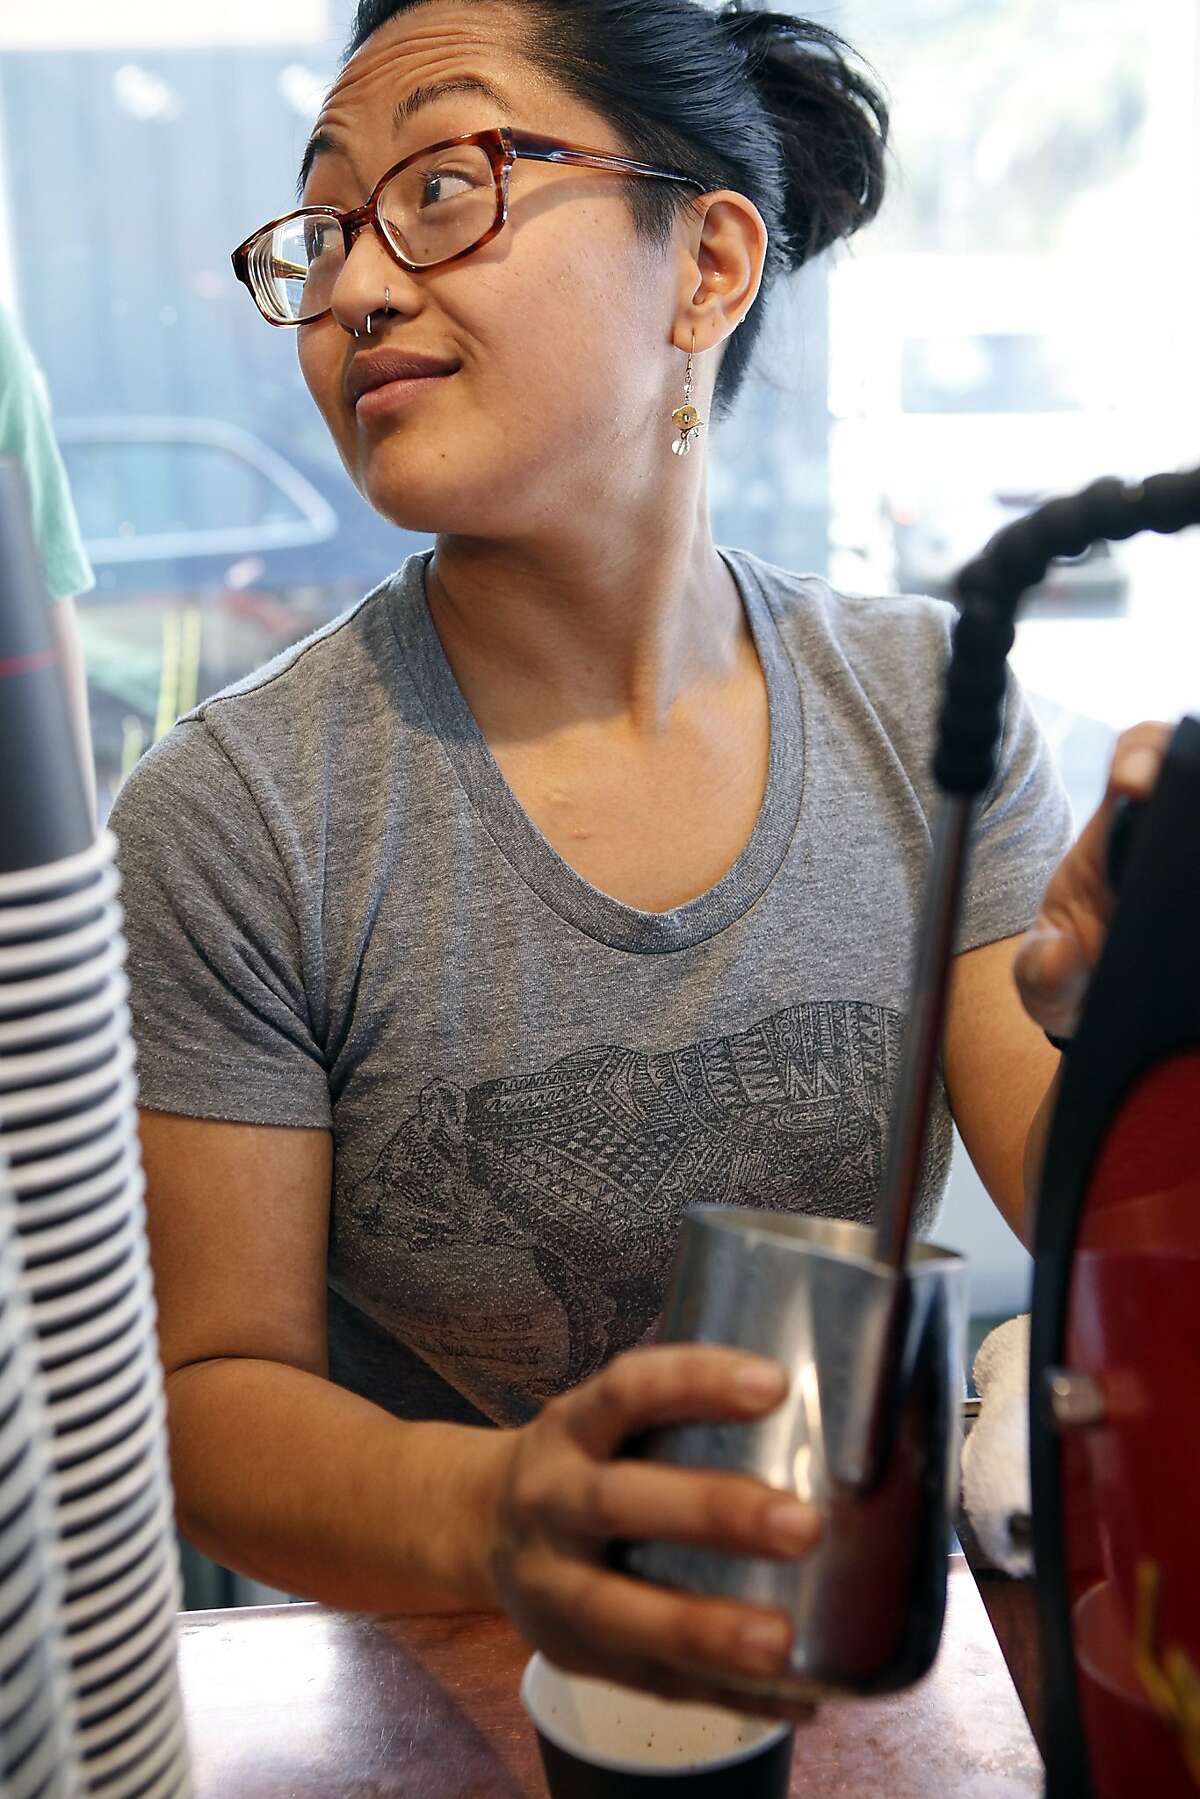 Barista Cat Mungcal heats up milk for a latte while working at Equator Coffees at Proof Lab Surf Shop in Mill Valley, CA, Tuesday, March 18, 2014.